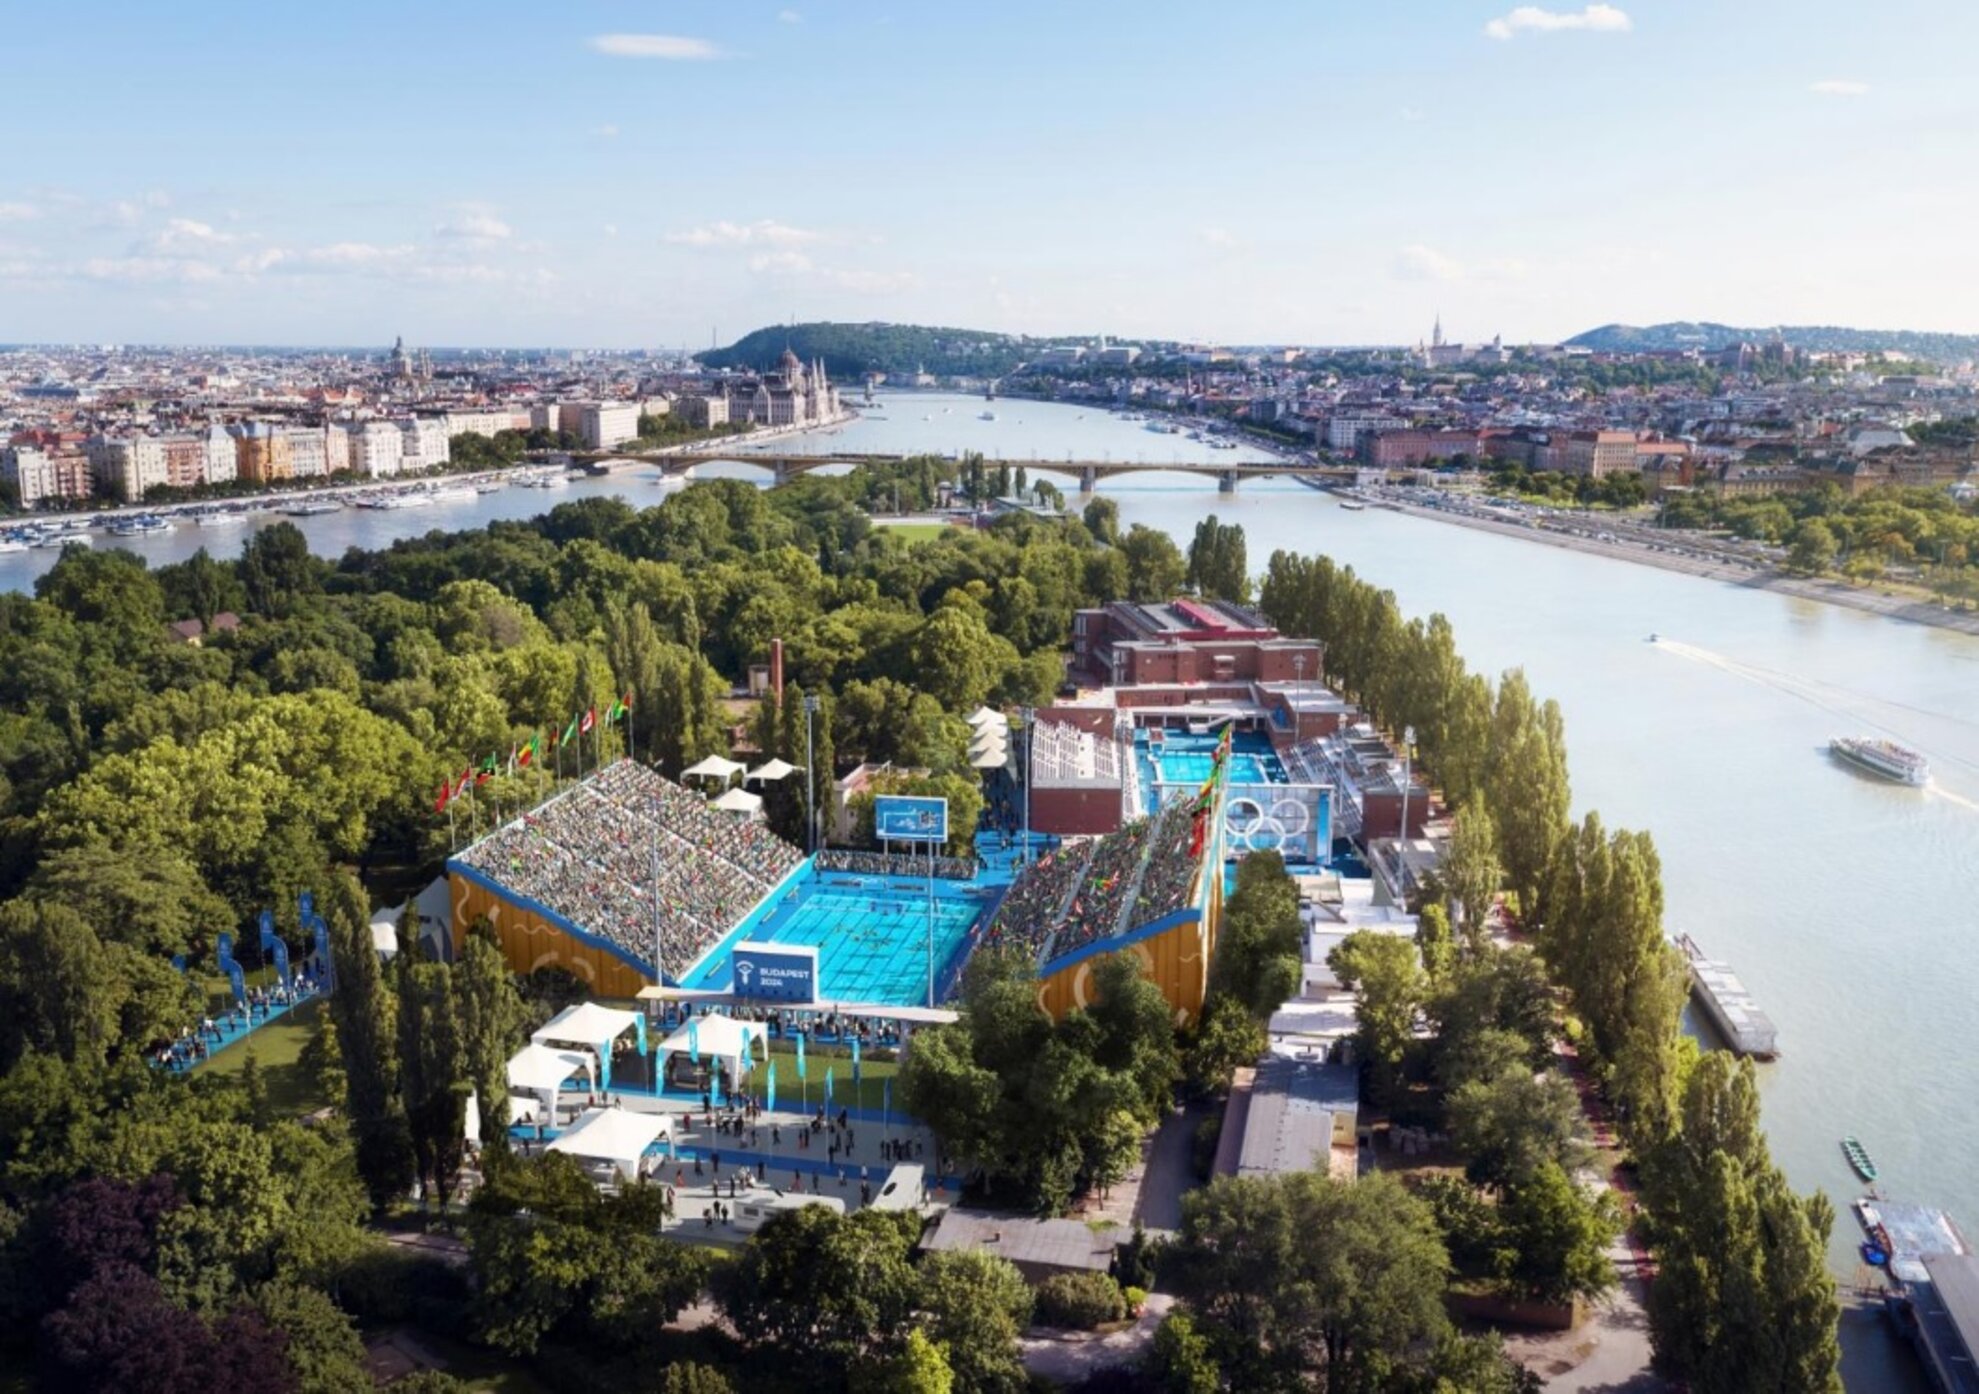 Plans unveiled for Budapest’s proposed 2024 Olympics venues